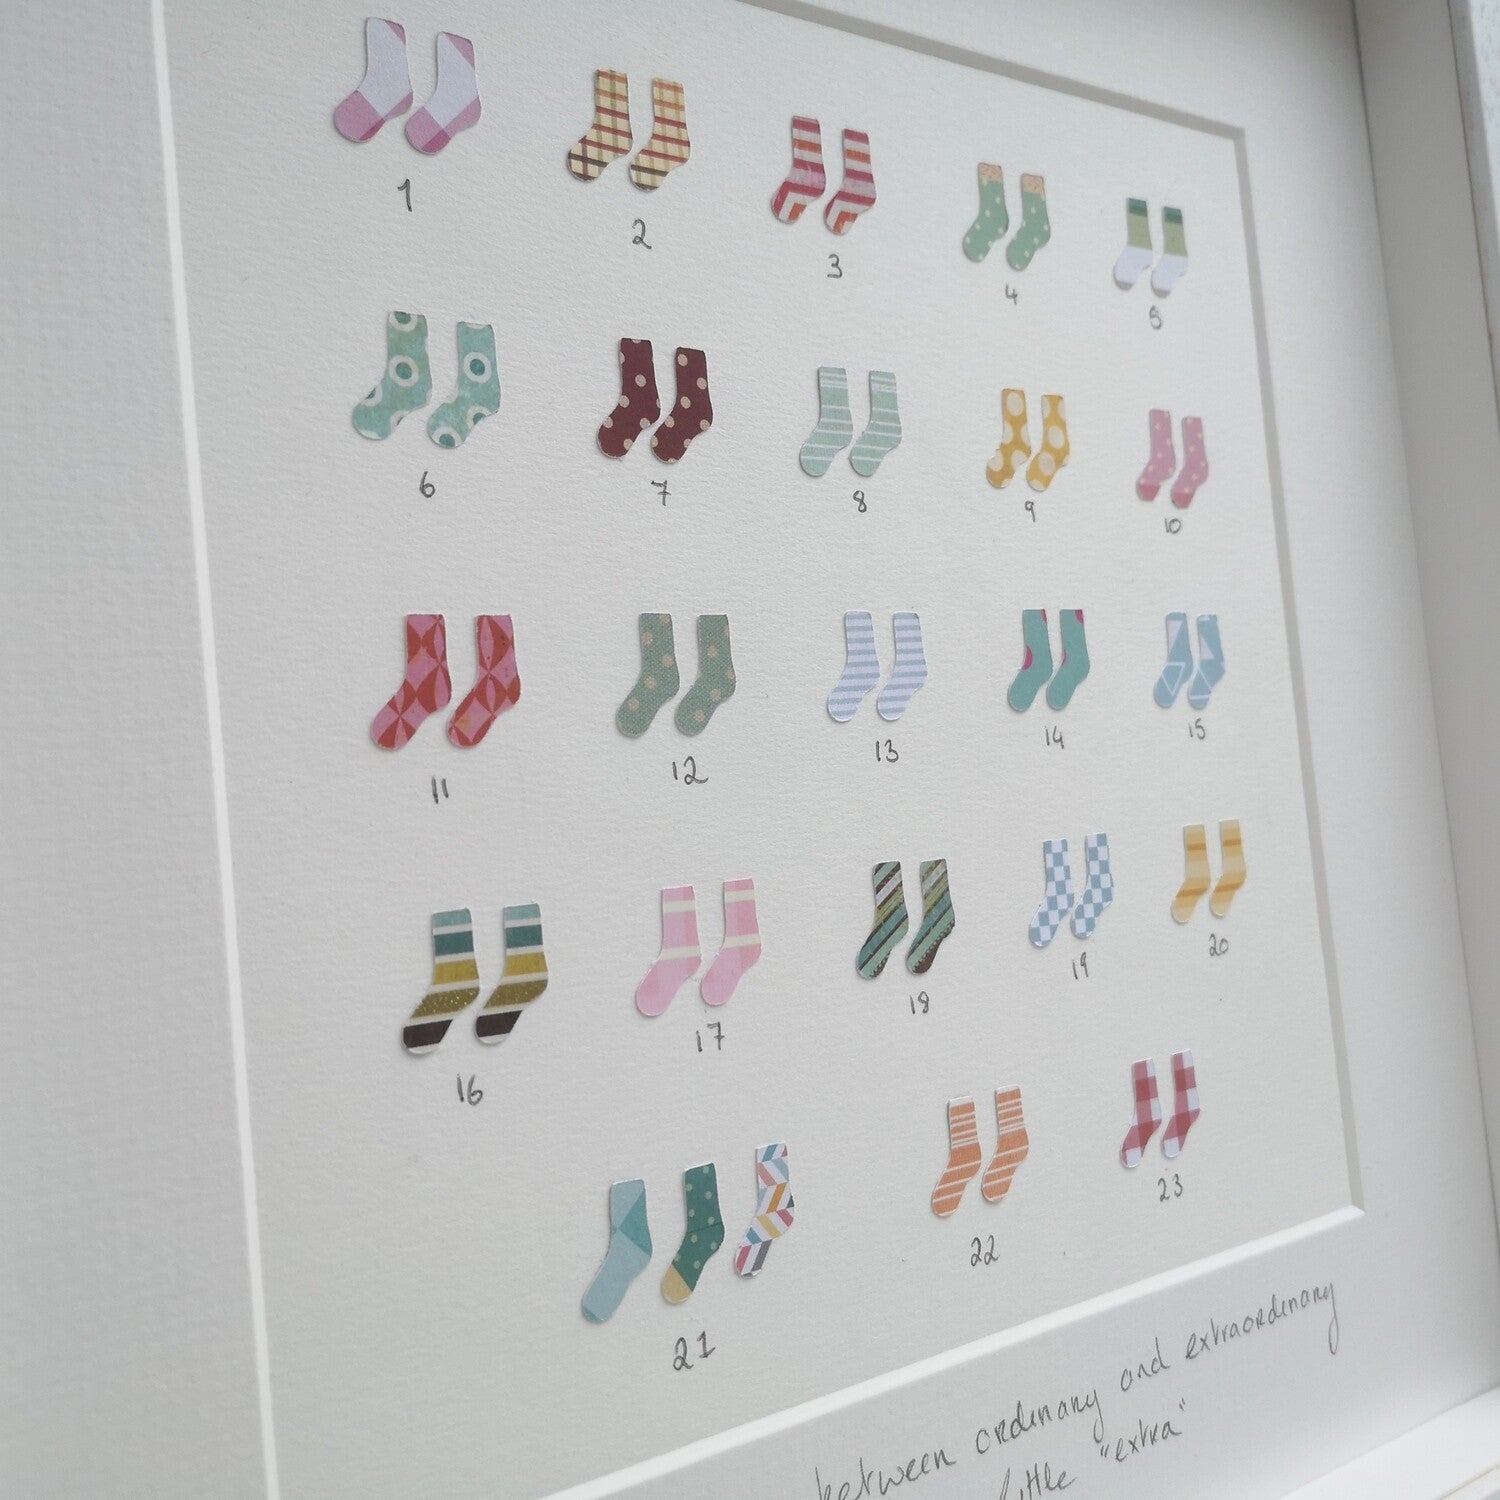 A close up of the 47 papercut socks in a handmade 30x30cm deep box wooden frame, celebrating the 47 chromosomes that people with Down Syndrome have.